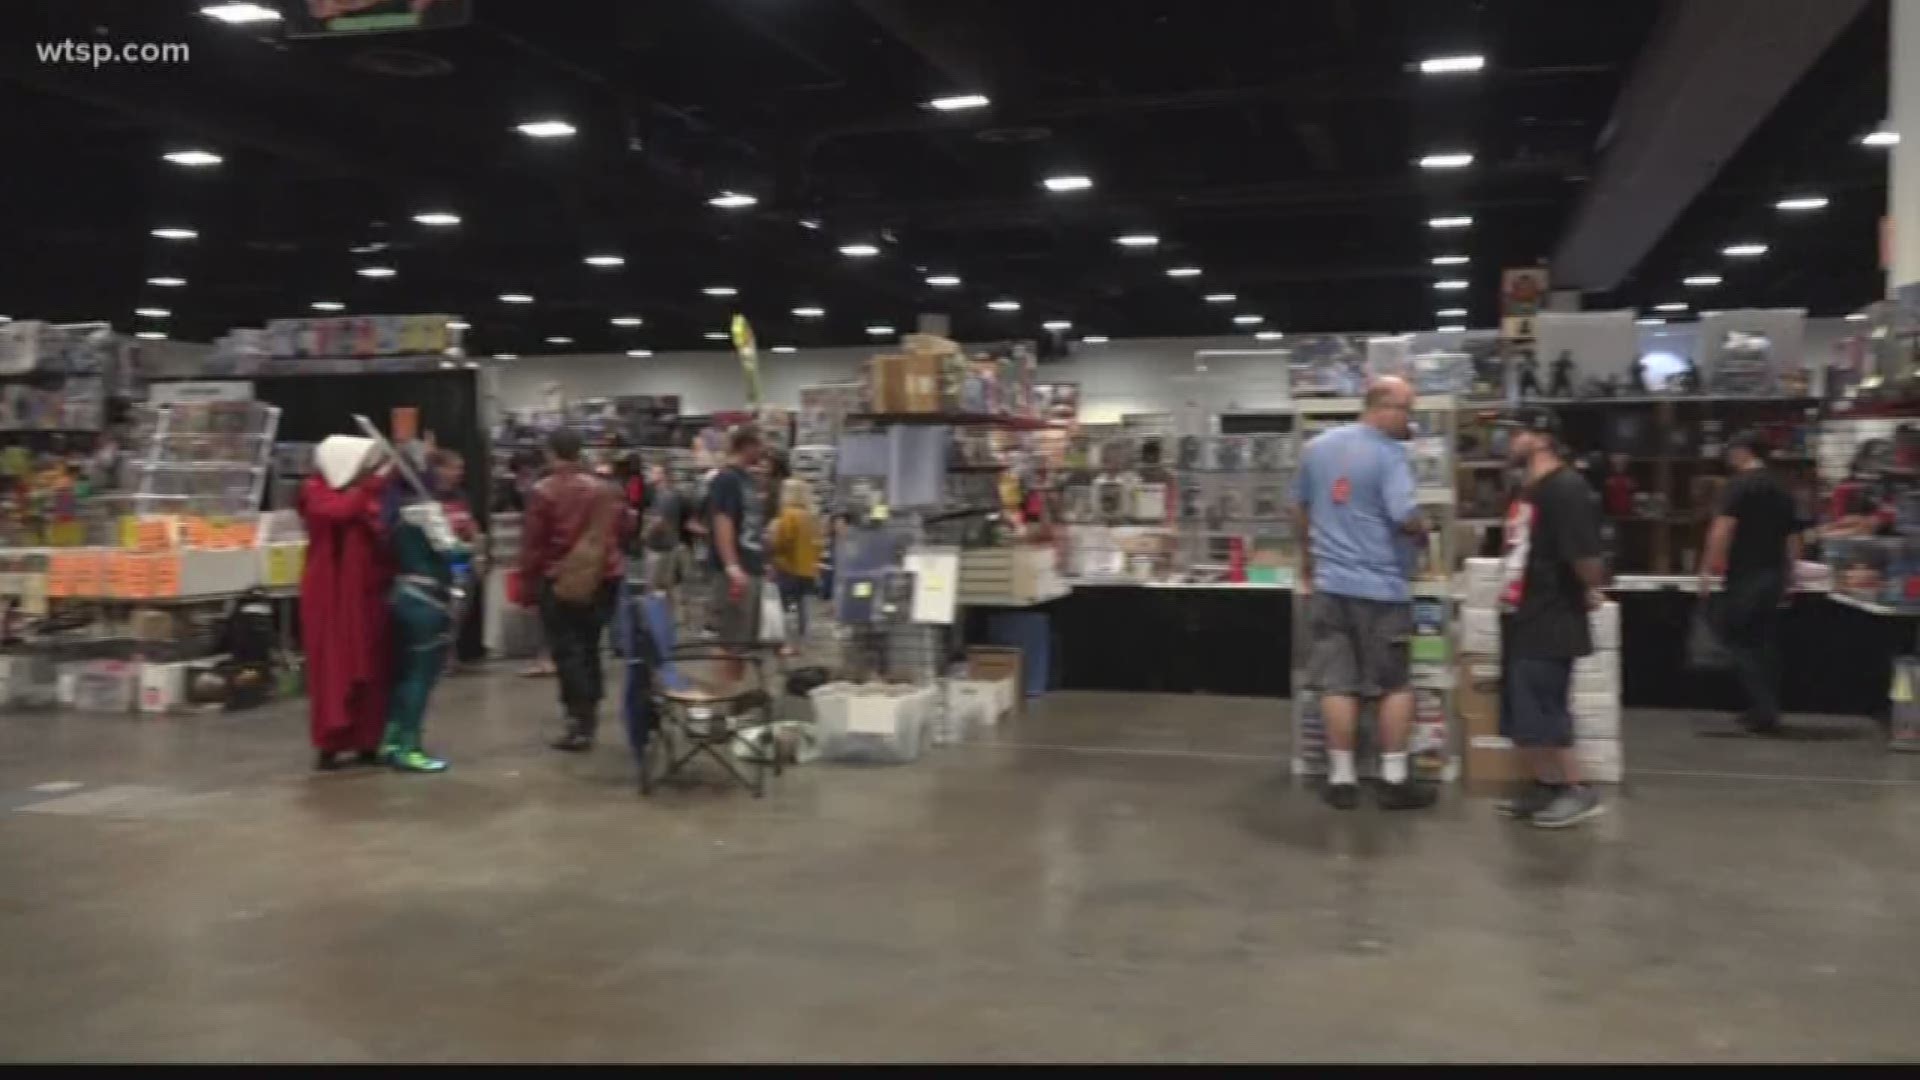 The annual convention has stars from "The Office" and the "Harry Potter" films along with the original voices of Skeletor and Big Bird. The nerd fest at the Tampa Convention Center is expected to draw some 50,000 people.